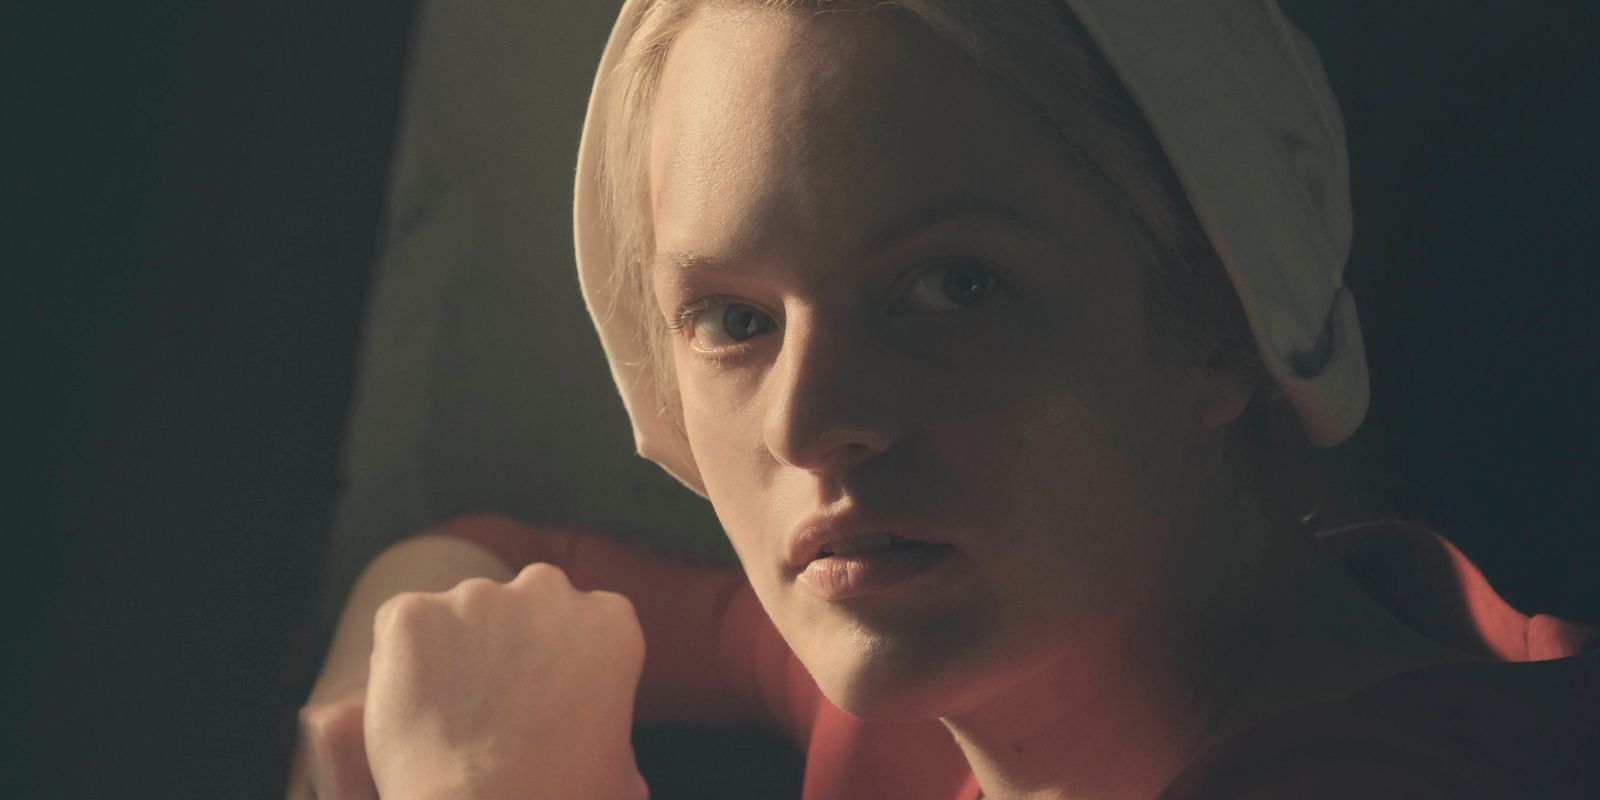 The Handmaid's Tale Season 1 Finale Prepares To Move Beyond the Book